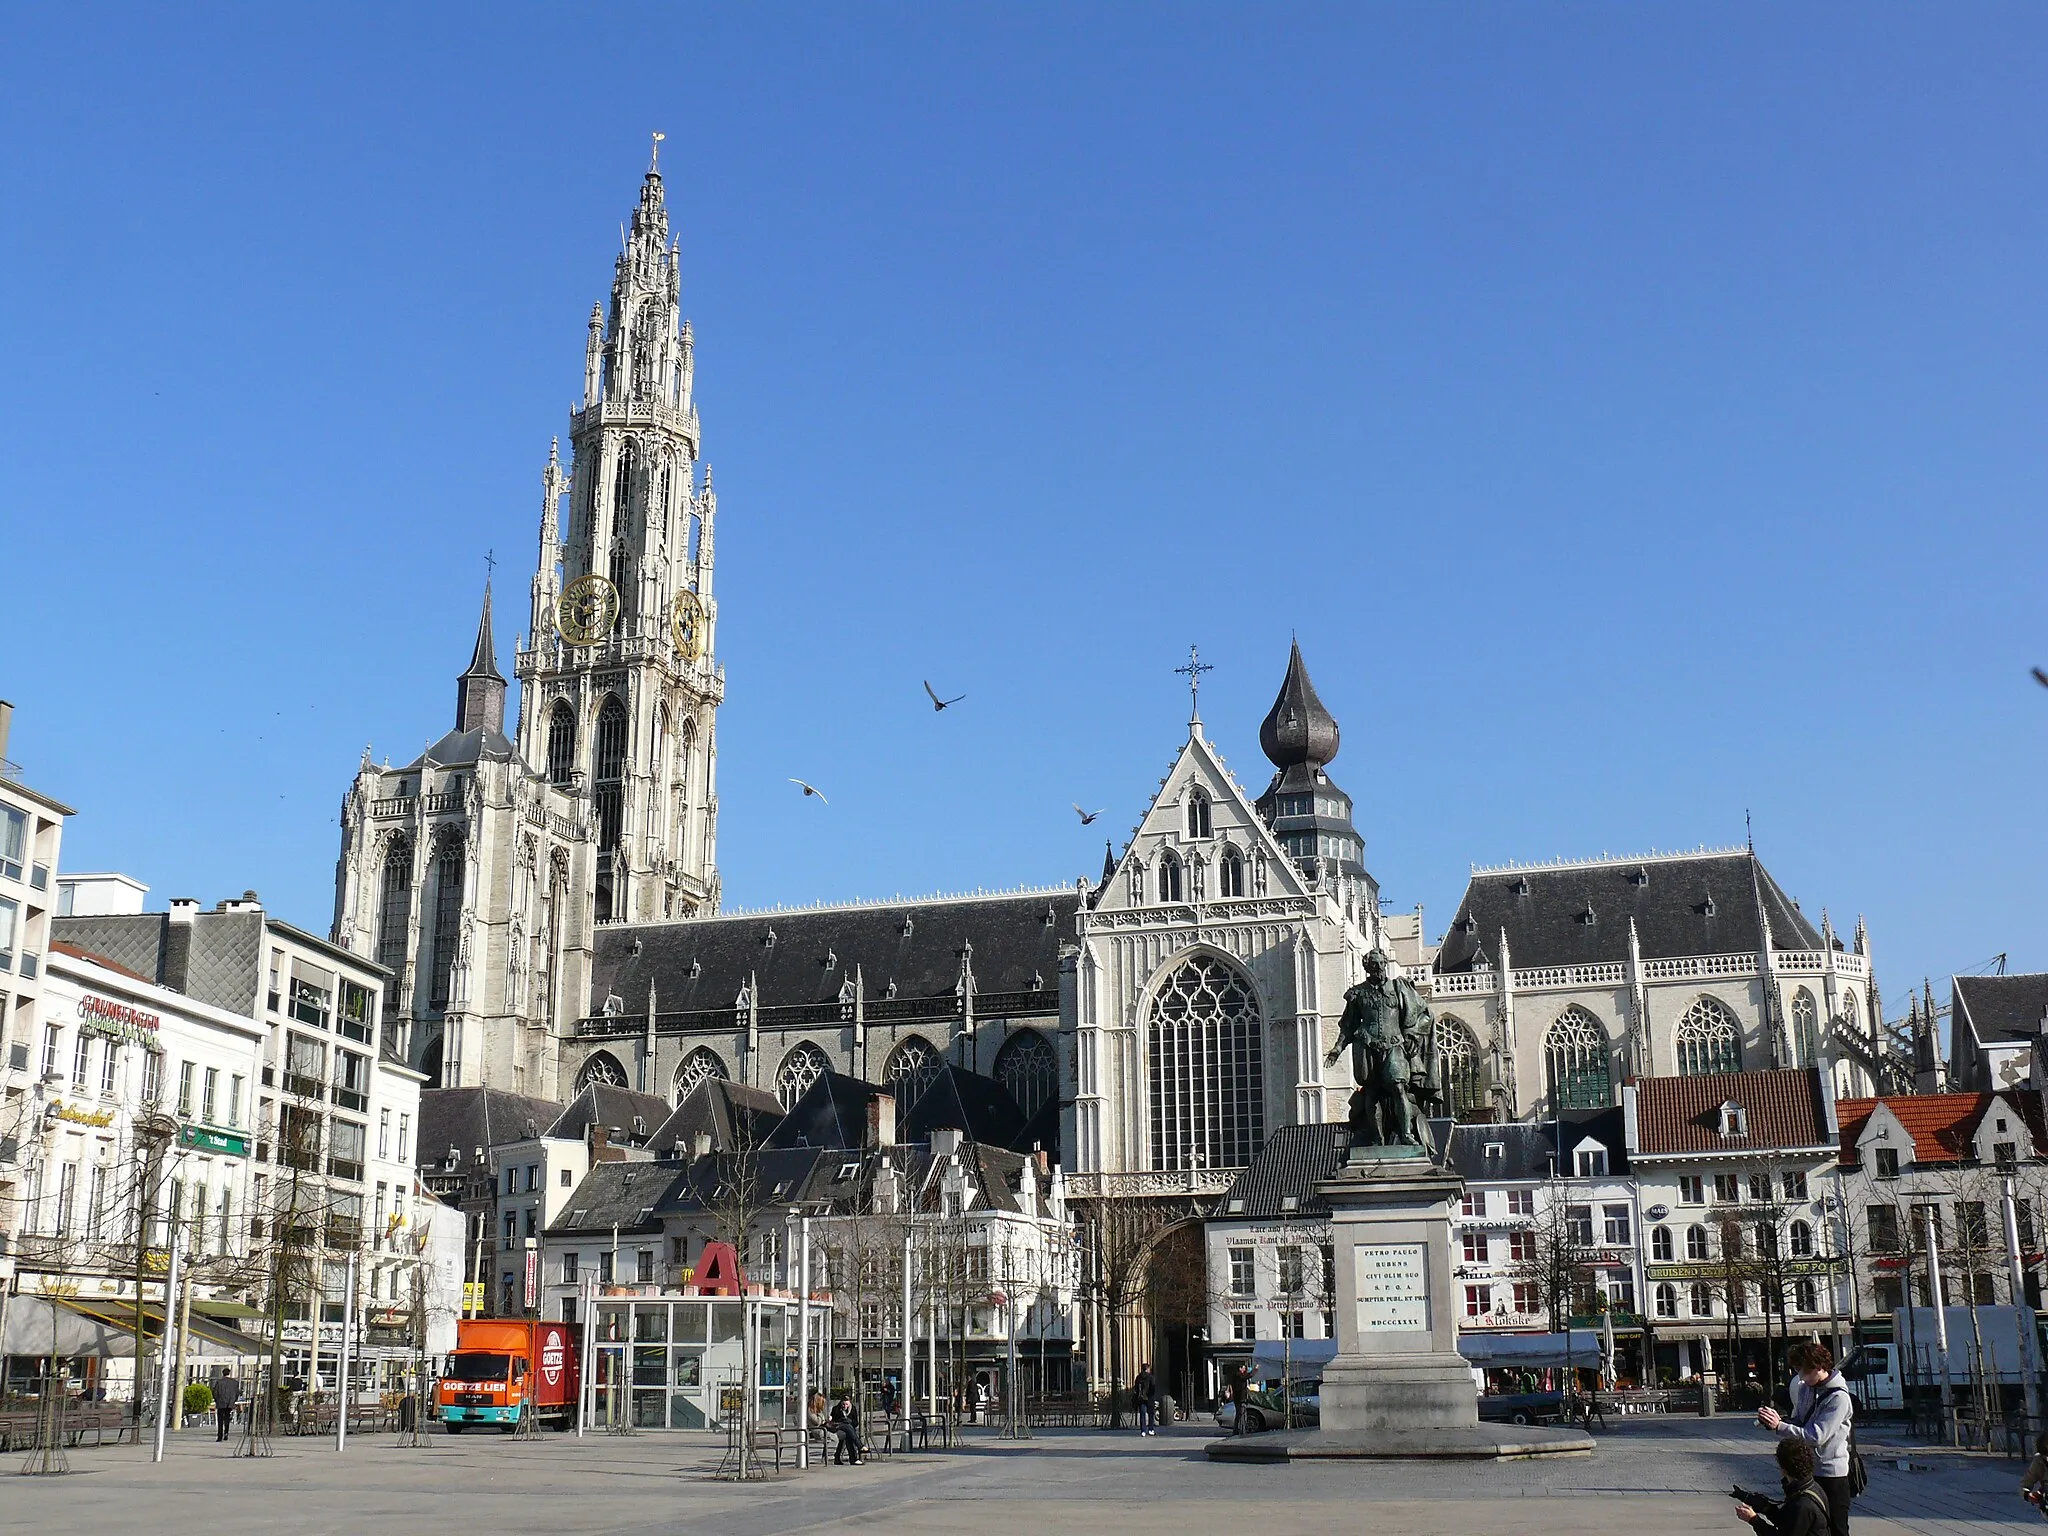 Photo showing: Our Lady's Cathedral, Antwerp, as seen from the Groenplaats.
The Groenplaats is a square in the centre of Antwerp. the square boasts a statue of Rubens, designed by Willem (Guillaume) Geefs (1805-1883) in 1840.

The Cathedral of Our Lady (Dutch: Onze-Lieve-Vrouwekathedraal ten Hemel Opgenomen) is a Roman Catholic parish church in Antwerp, Belgium. The today's see of the Diocese of Antwerp was started in 1352 and, although the first stage of construction was ended in 1521, has never been 'completed'. In Gothic style, its architects were Jan and Pieter Appelmans. It contains a number of significant works by the Baroque painter Peter Paul Rubens, as well as paintings by artists such as Otto van Veen, Jacob de Backer and Marten de Vos.